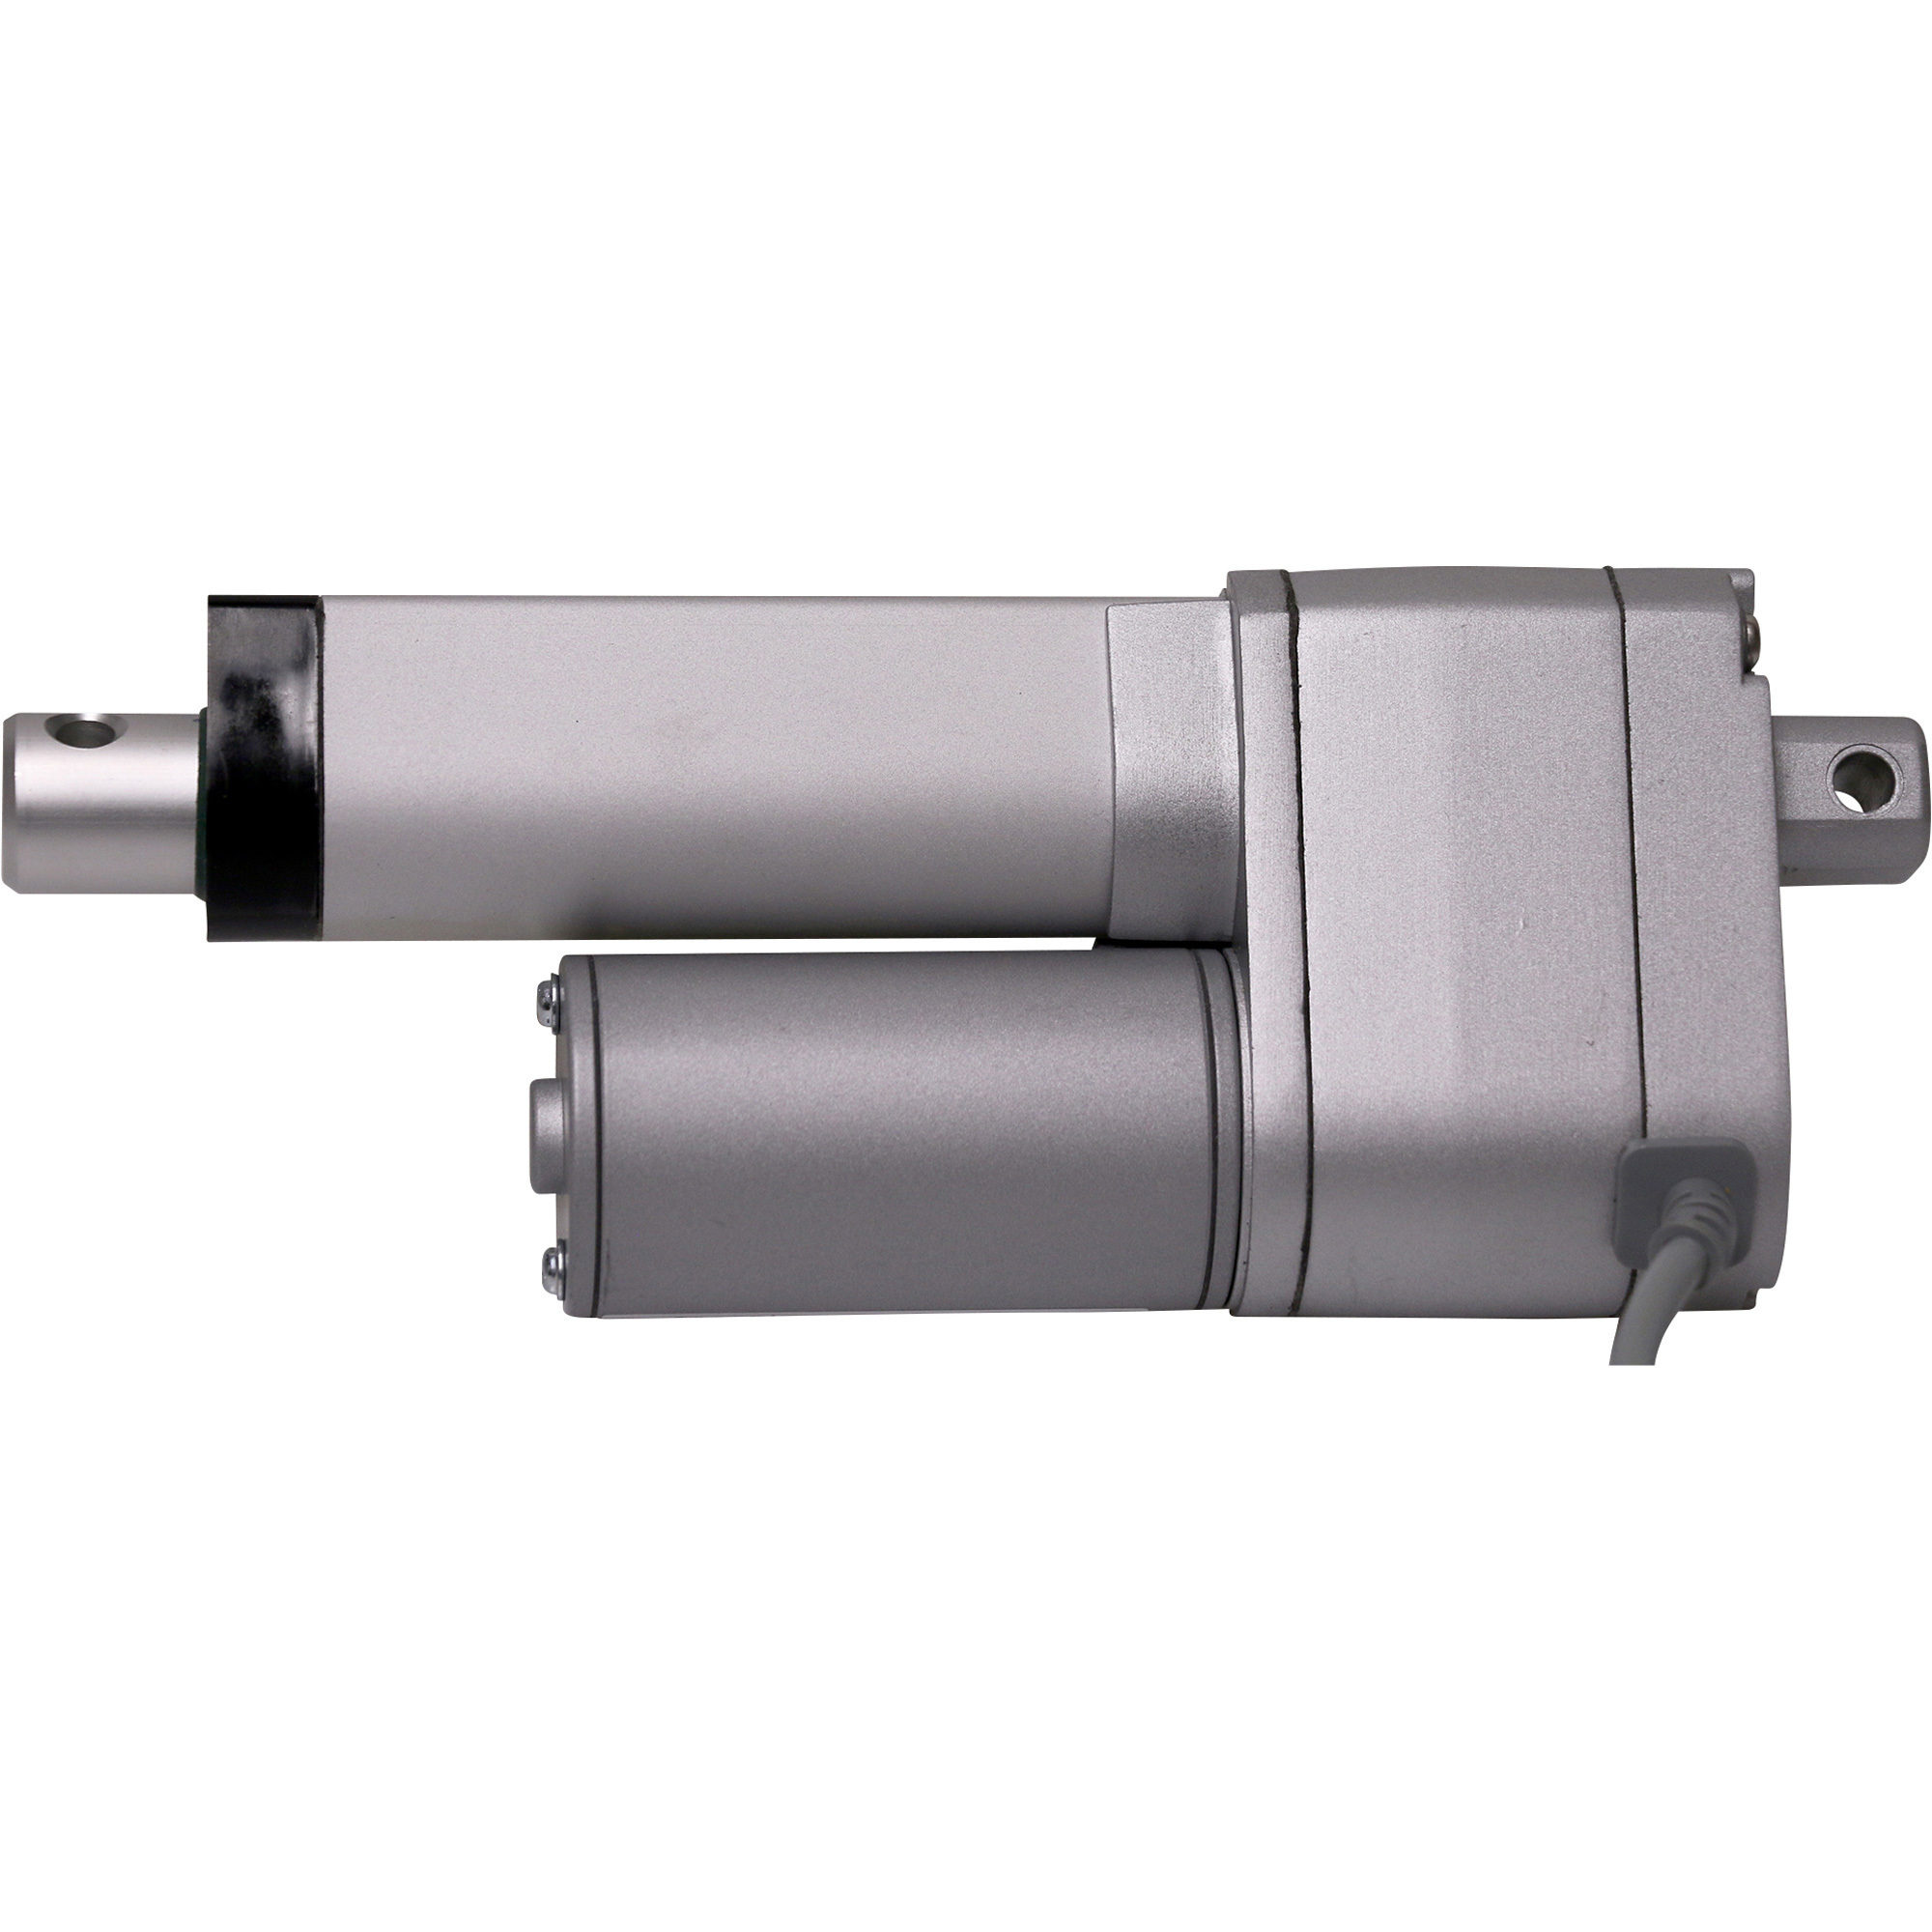 Glideforce 67-Lb. Capacity High-Speed Linear Actuator by Concentric â 11.69Inch Light Duty, 6Inch Stroke, 12V, Model GF23-120506-3-65